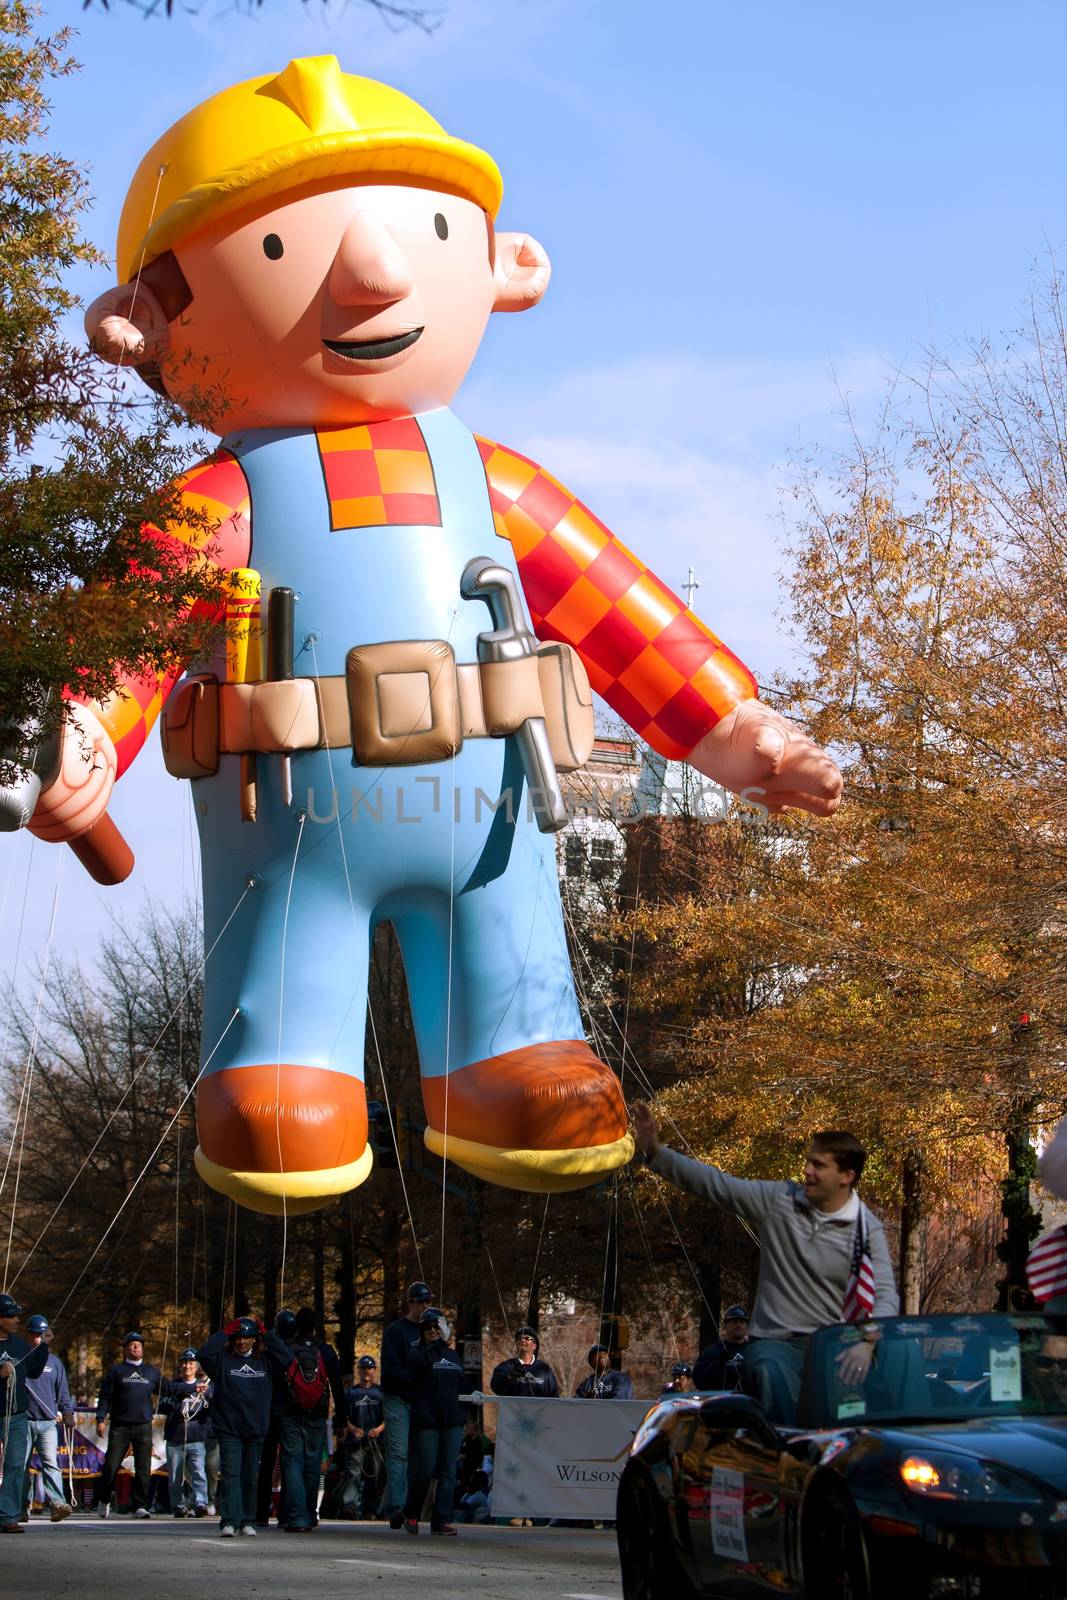 Inflated Construction Worker Balloon In Atlanta Christmas Parade by BluIz60